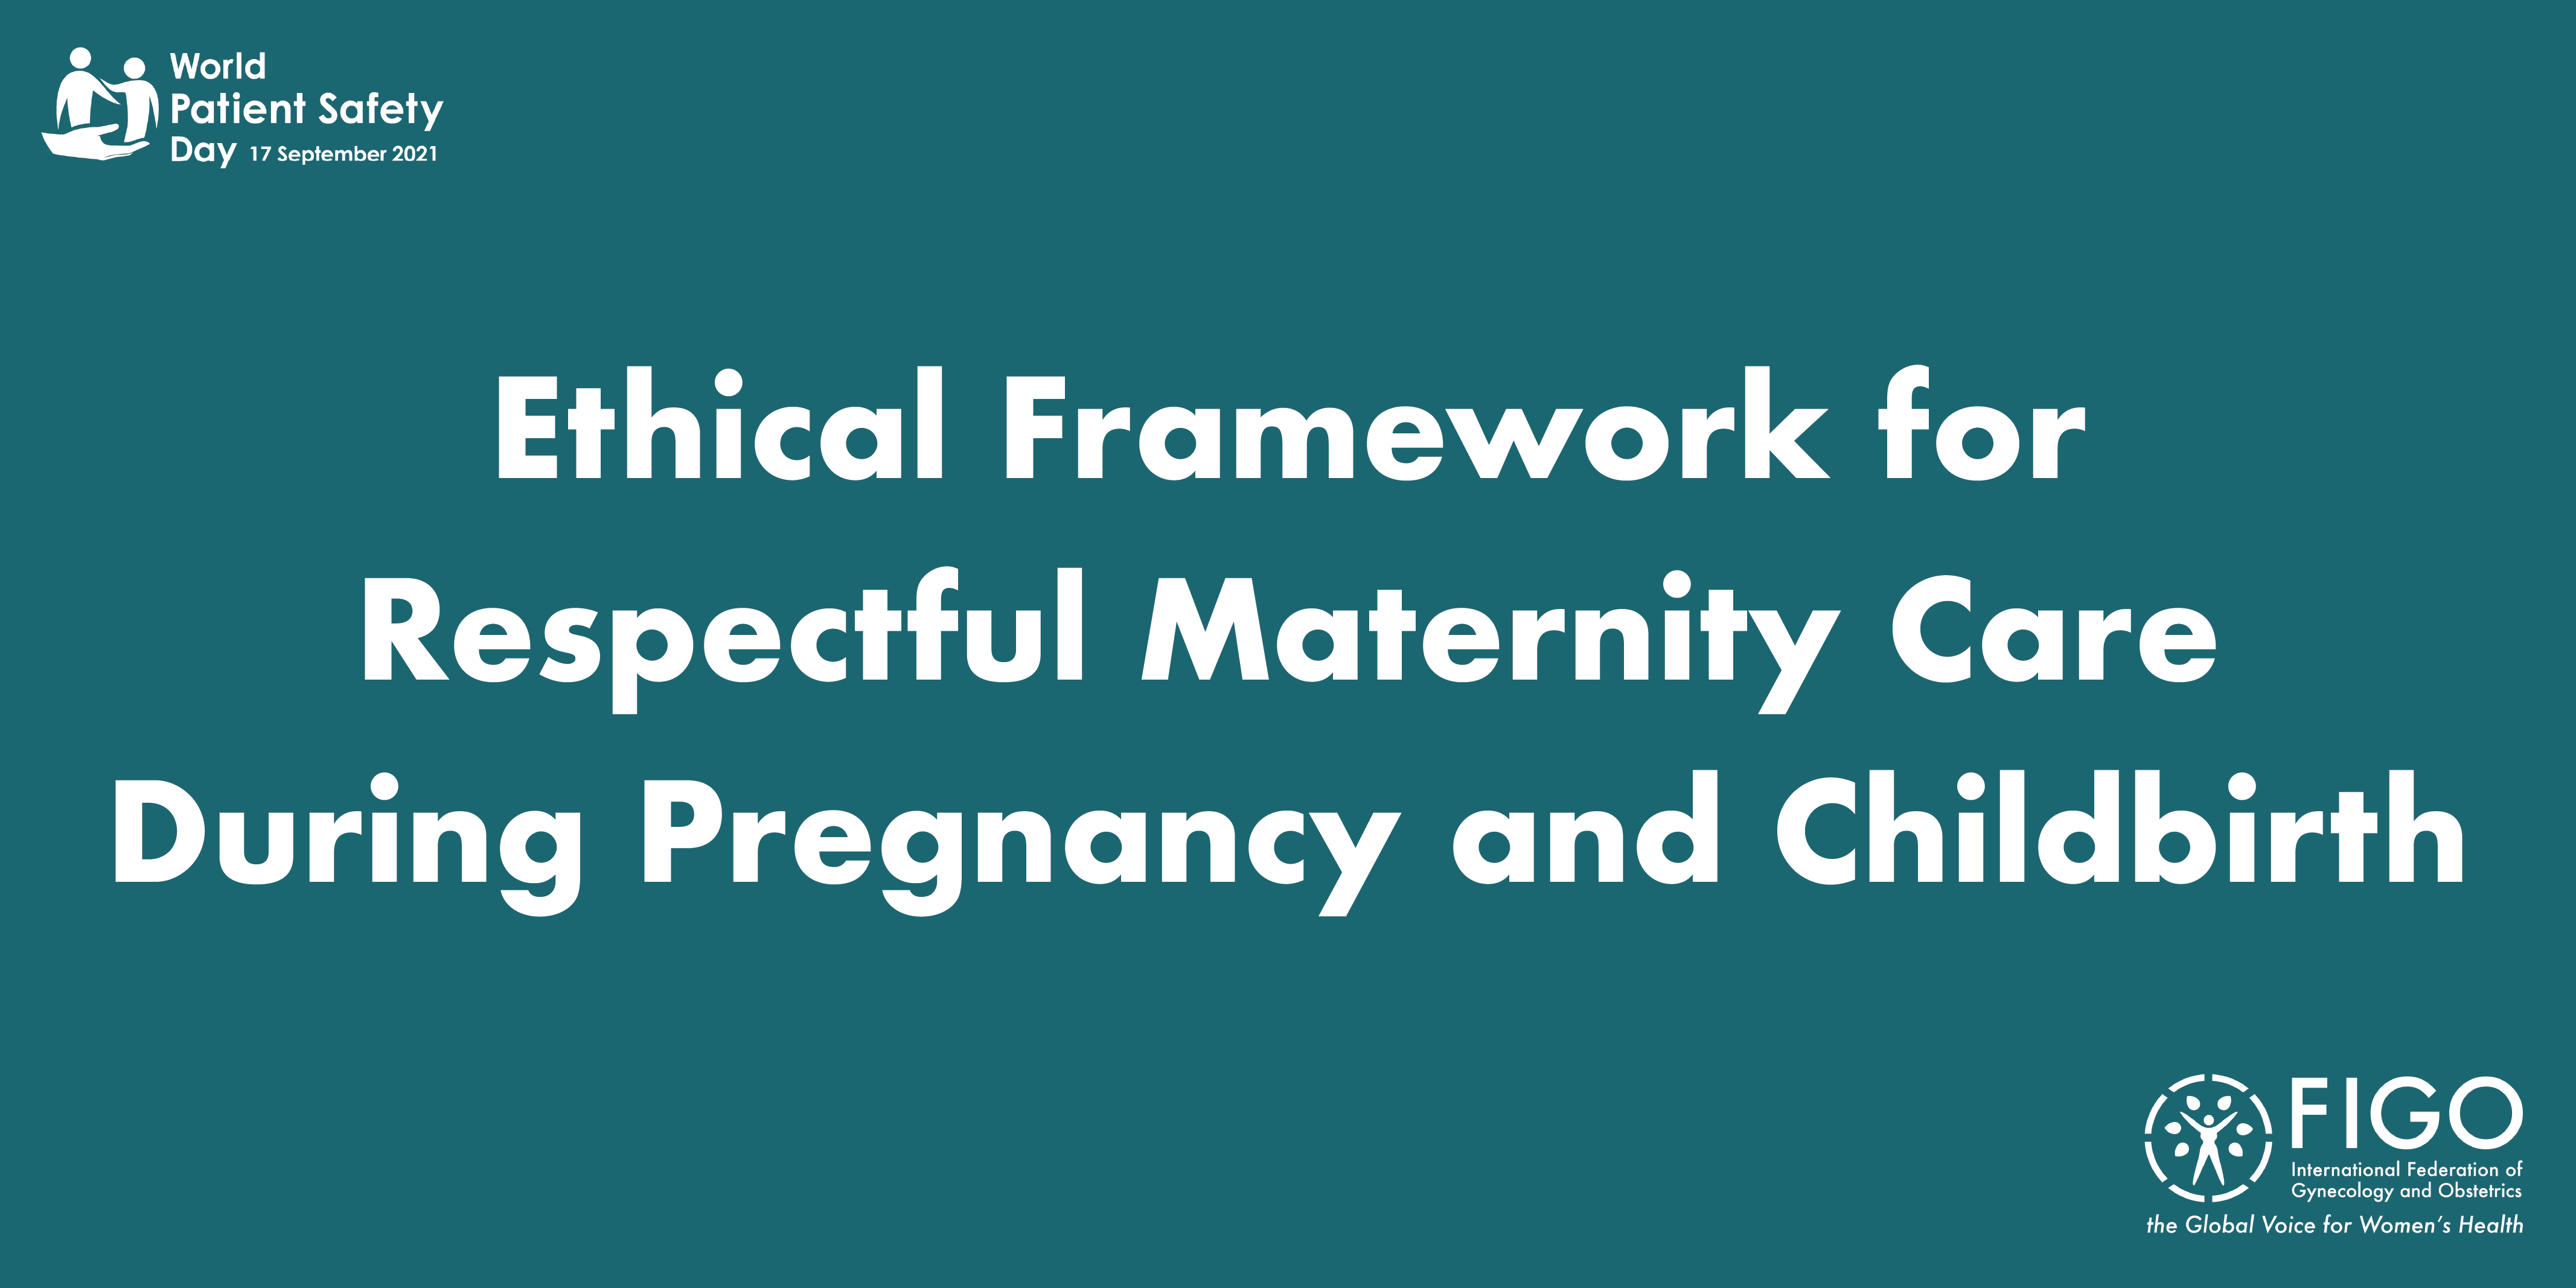 Statement: ethical framework for respectful maternity care during pregnancy and childbirth